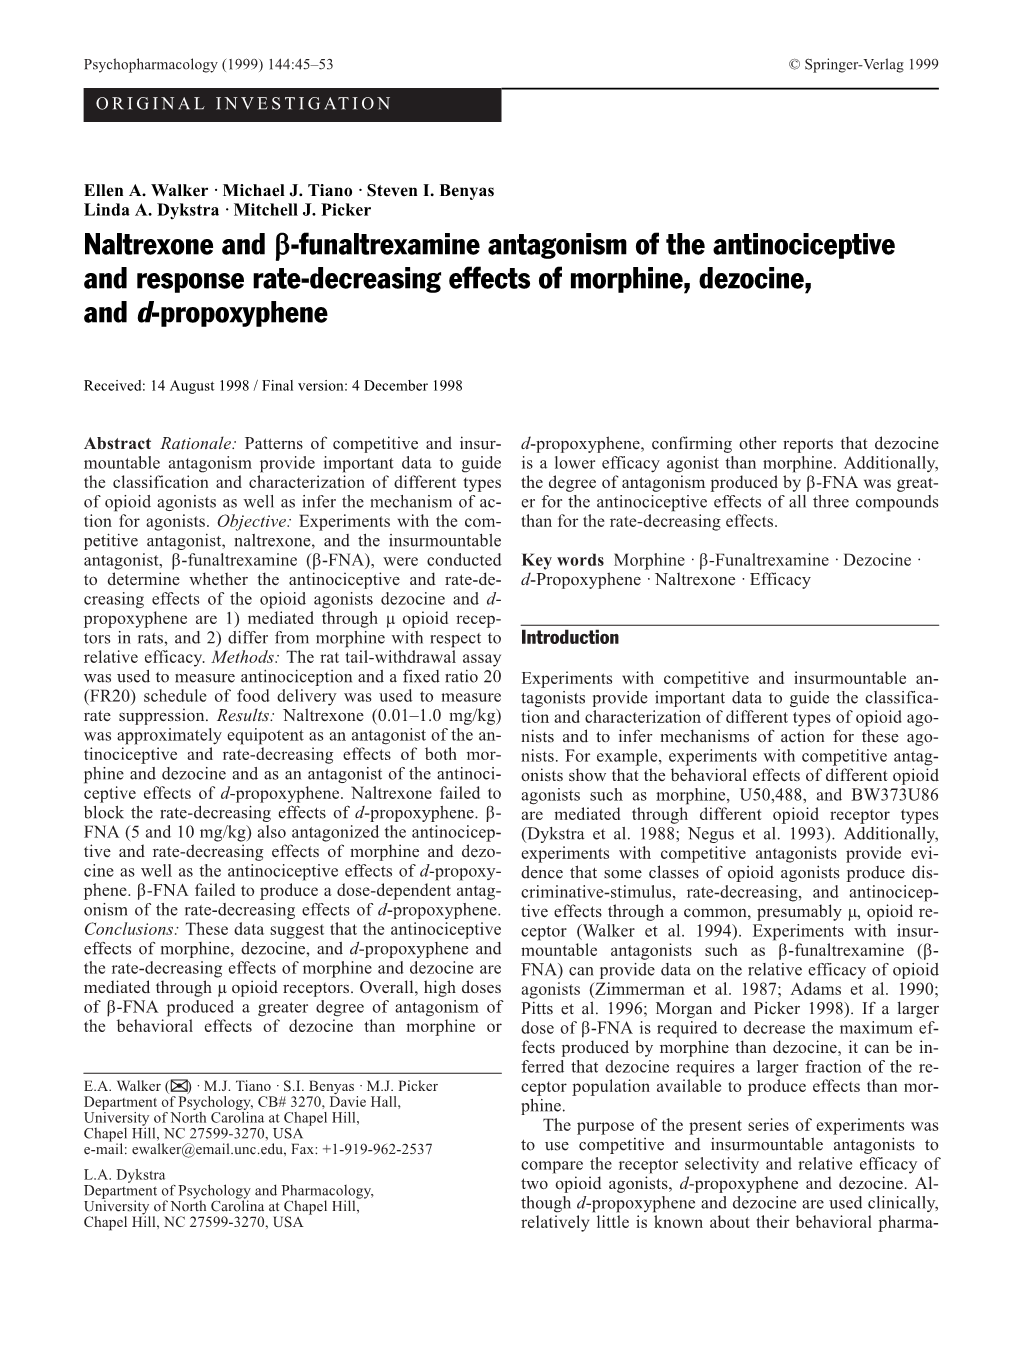 Naltrexone and Β-Funaltrexamine Antagonism of the Antinociceptive and Response Rate-Decreasing Effects of Morphine, Dezocine, and D-Propoxyphene